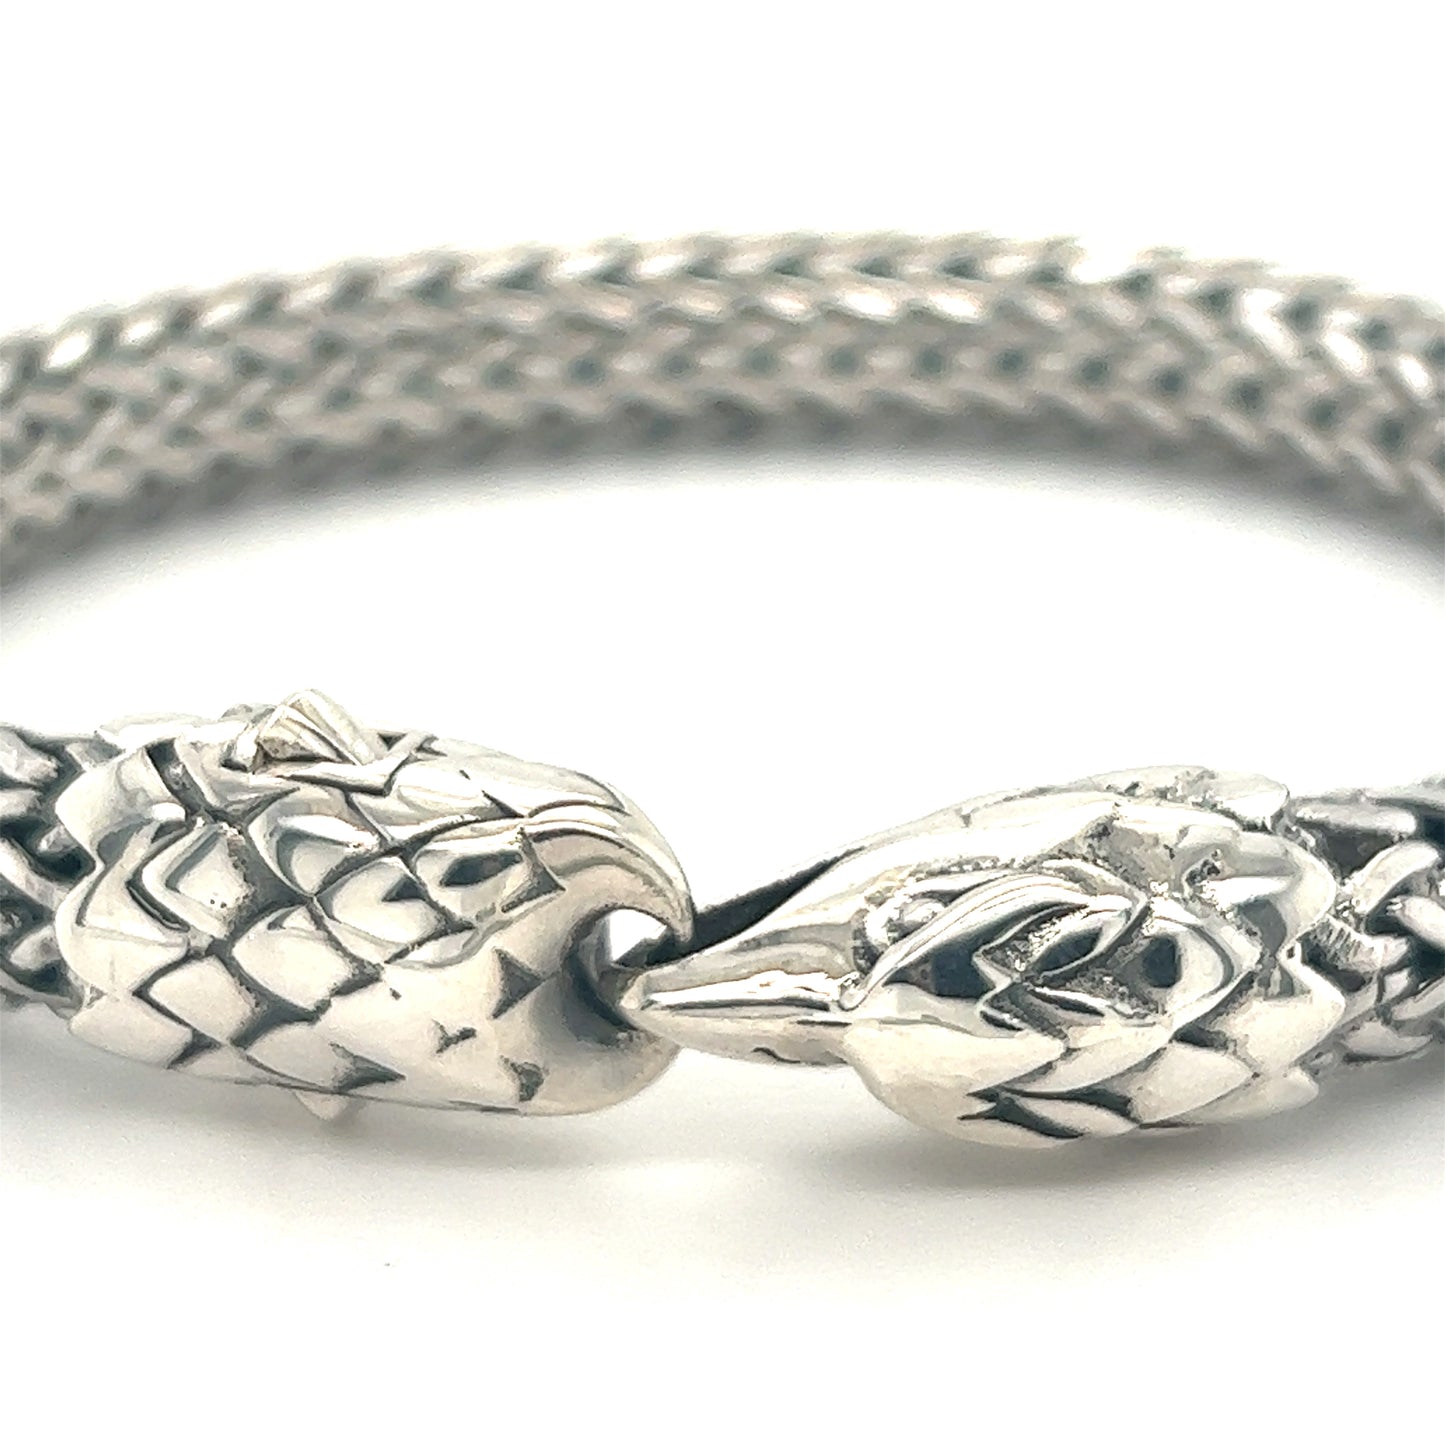 A Super Silver Heavy Braided Bracelet with Eagle Clasp.